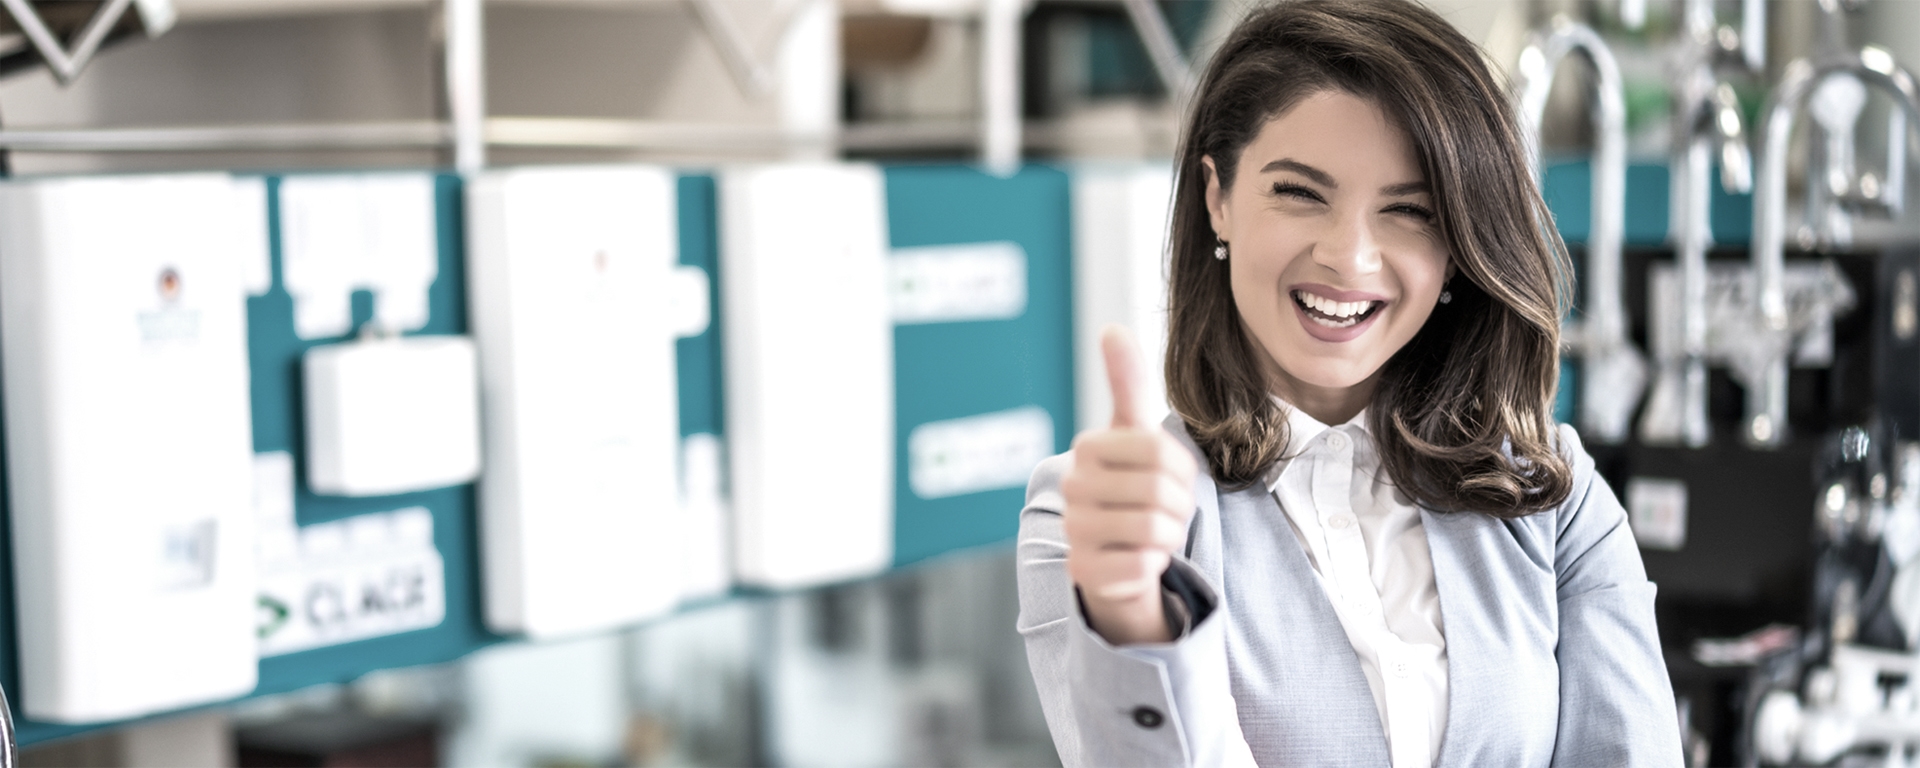 Woman smiling with thumbs up